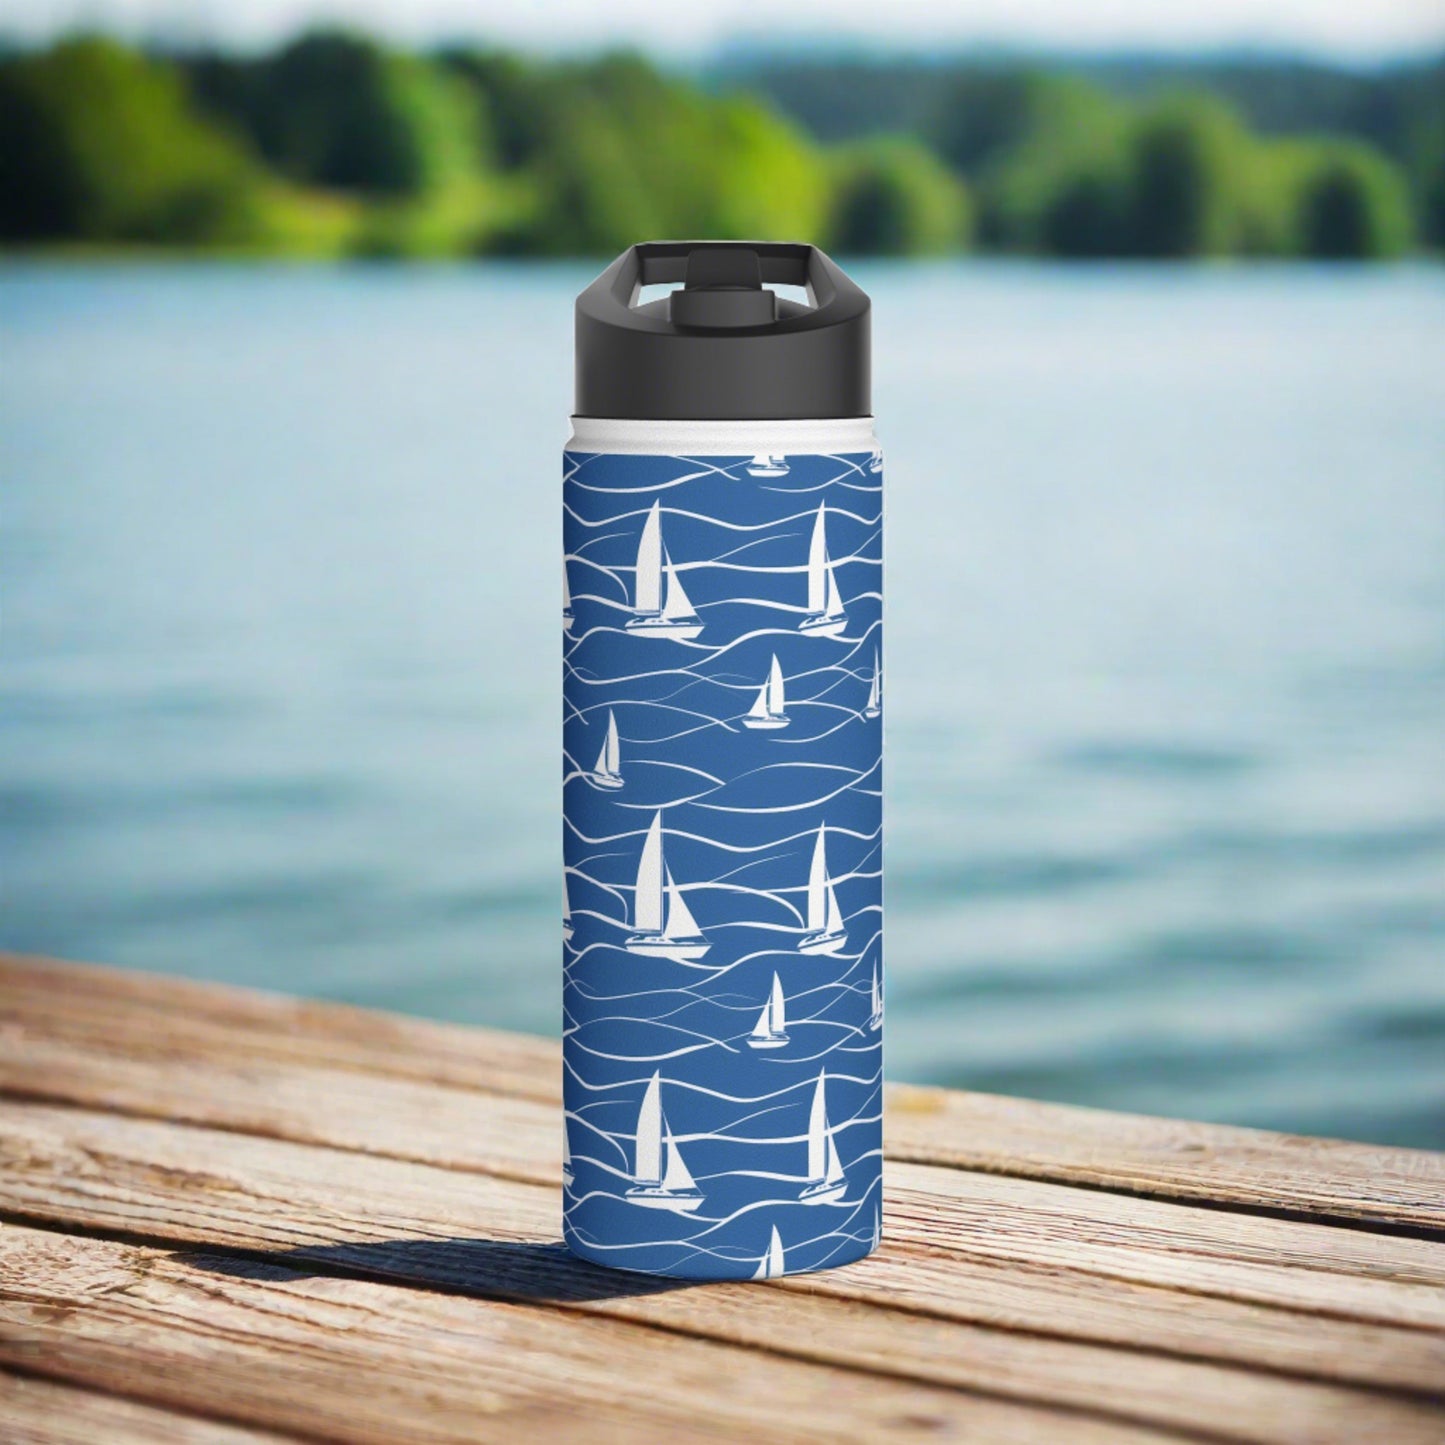 Stainless Steel Water Bottle Thermos, 18oz, Sailboats - Double Wall Insulation Keeps Drinks Hot or Cold